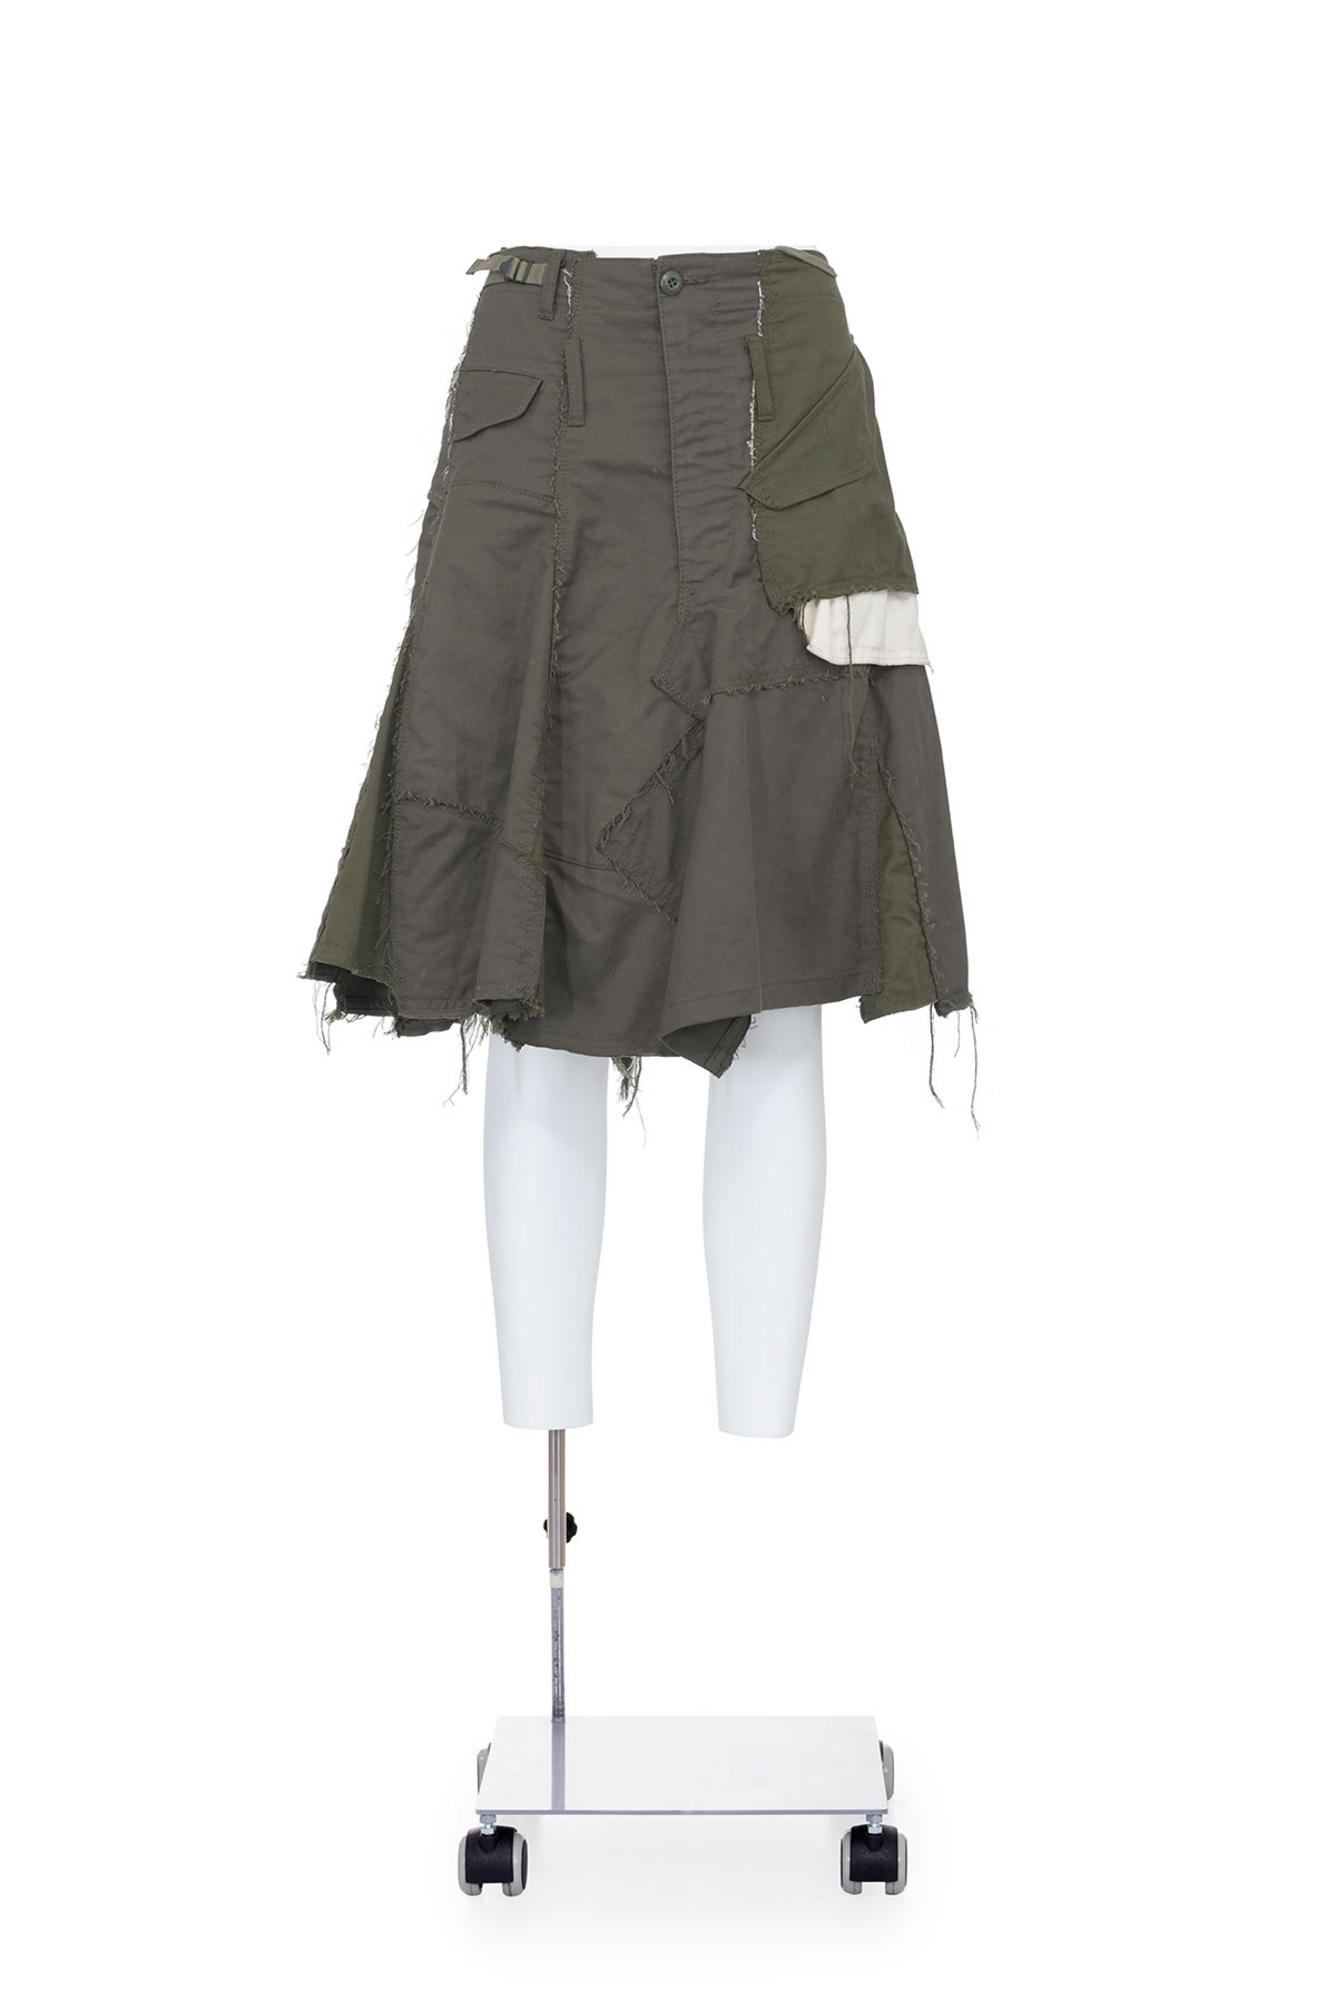 JUNYA WATANABE Iconic military patchwork flared skirt DESCRIPTION: Iconic...